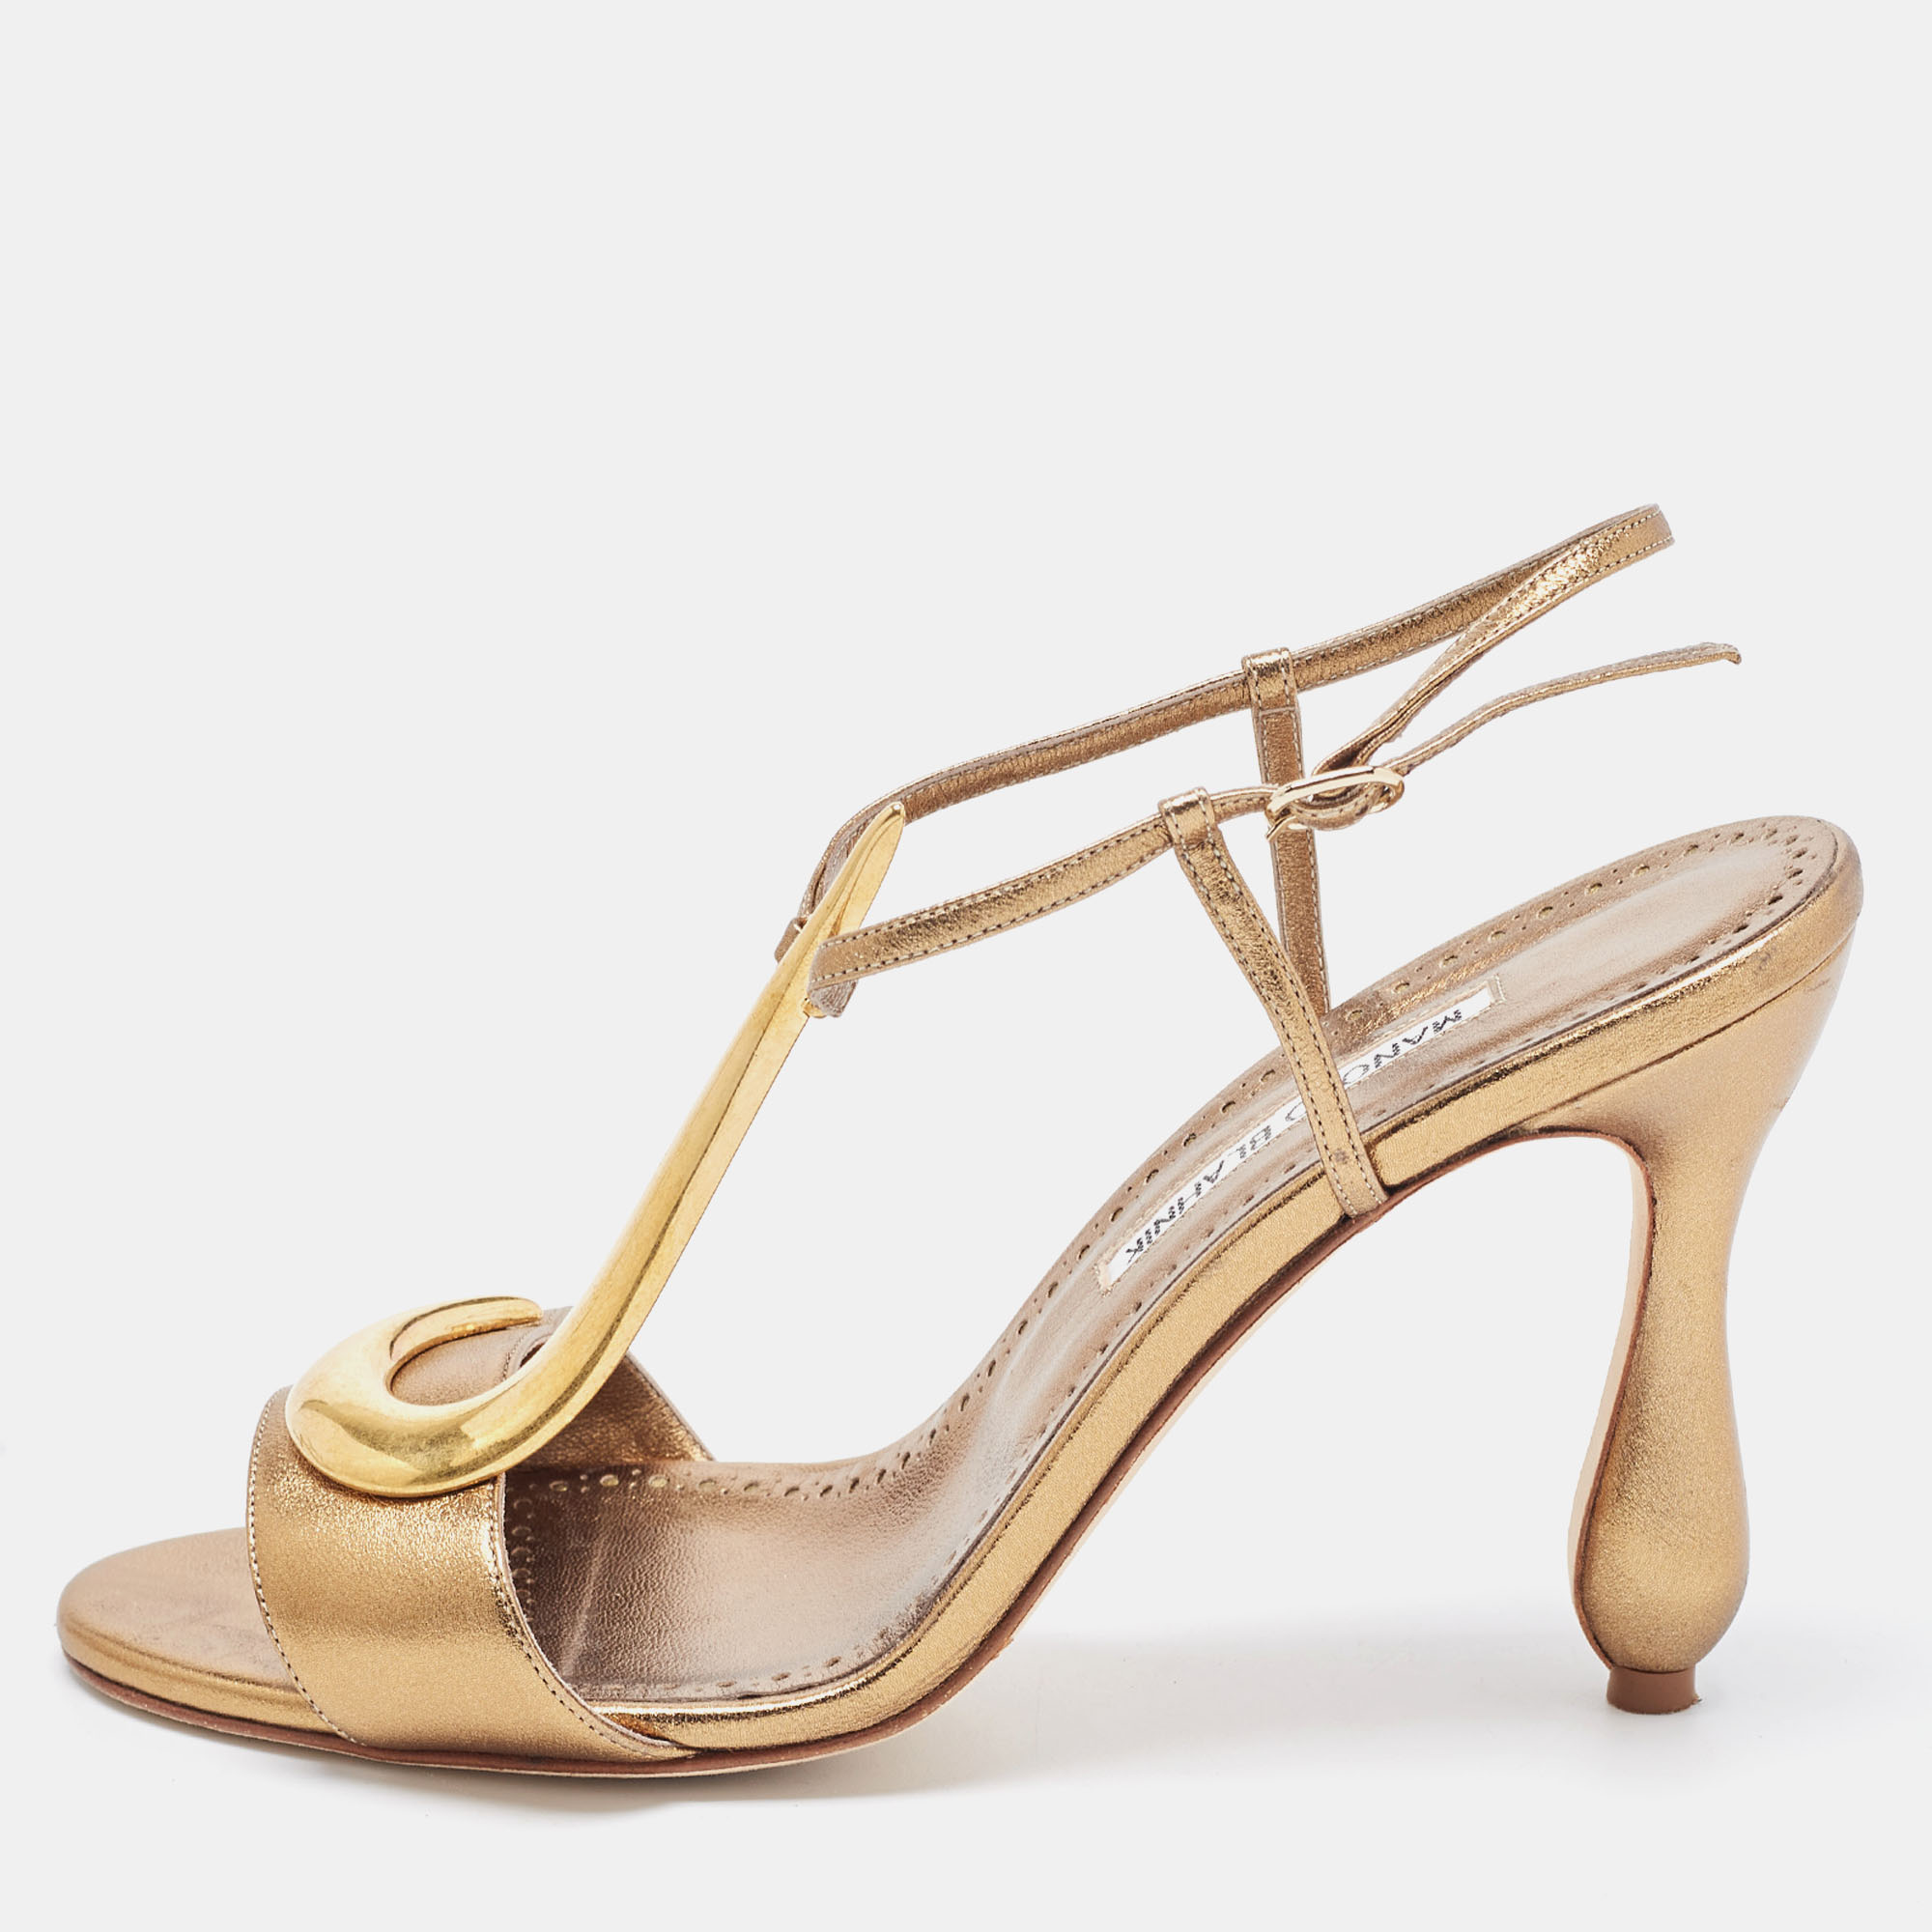 Pre-owned Manolo Blahnik Metallic Leather Ankle Strap Sandals Size 39